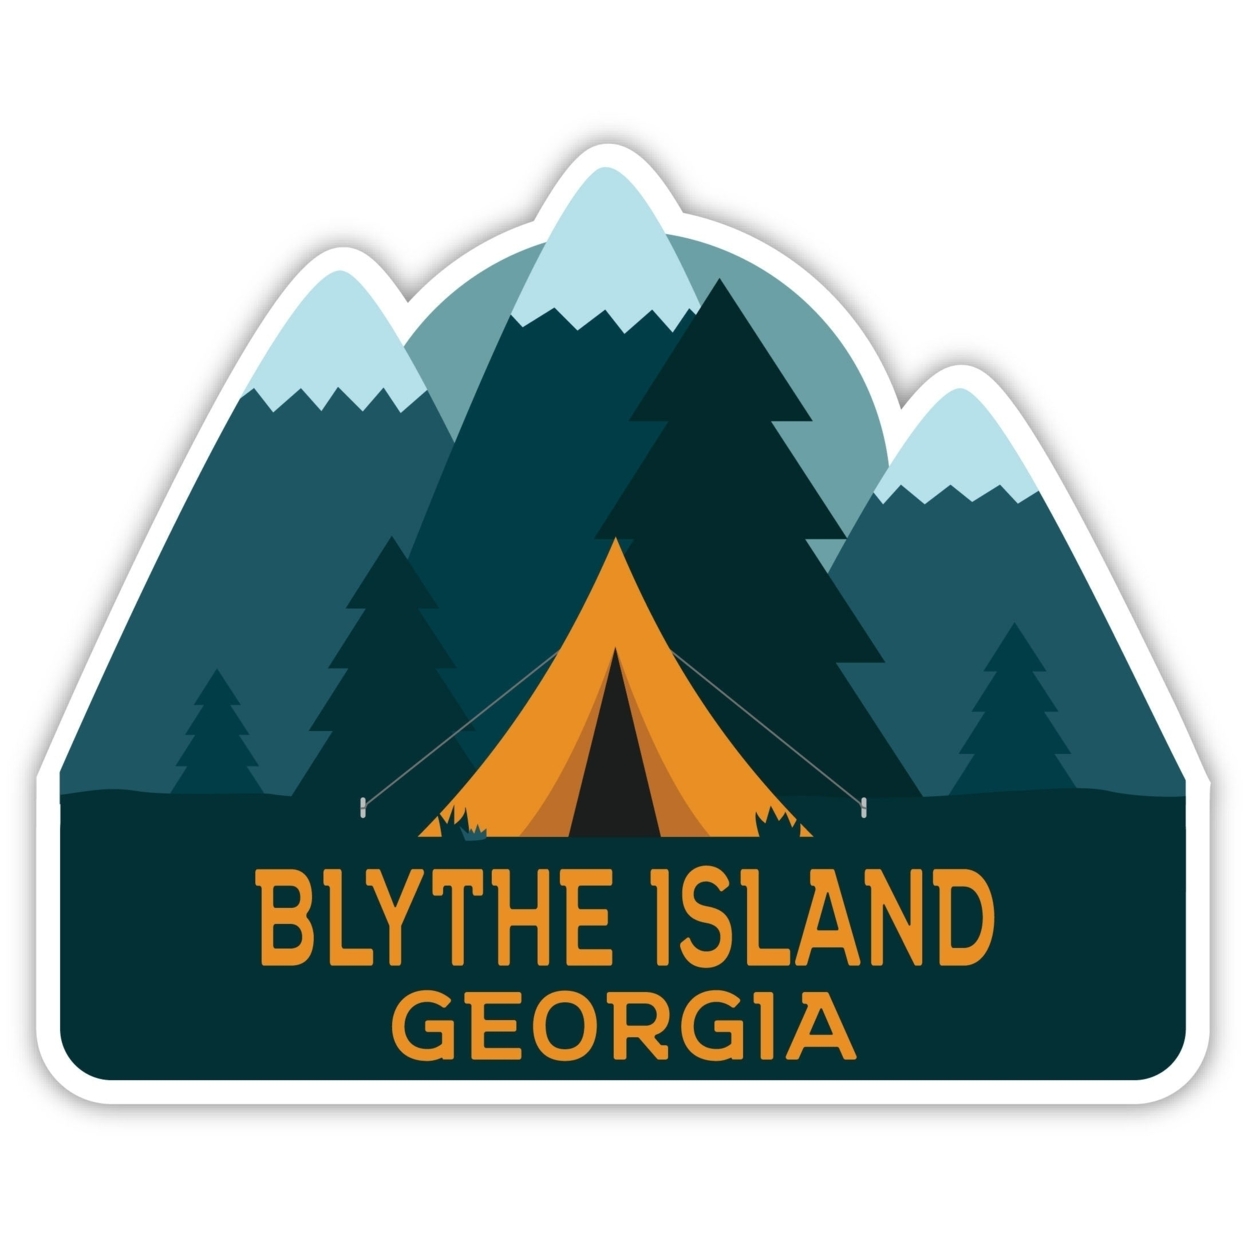 Blythe Island Georgia Souvenir Decorative Stickers (Choose Theme And Size) - 4-Pack, 4-Inch, Tent